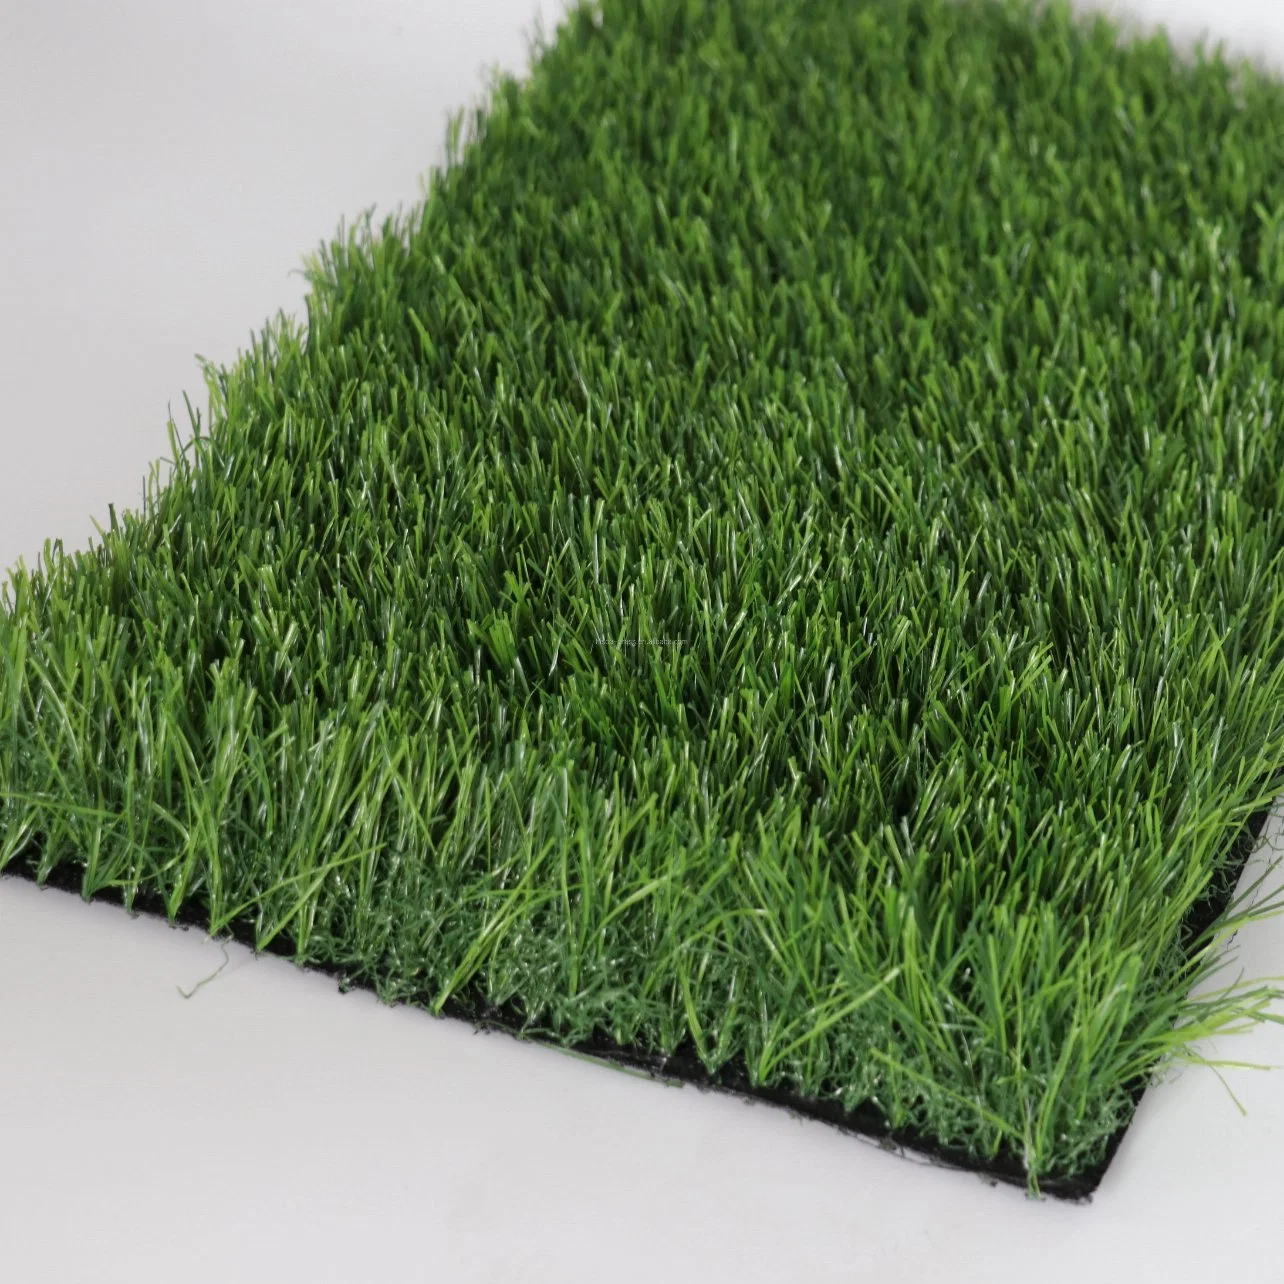 Yes for Landscaping Lw Football Turf Price Sporting Goods Recreation